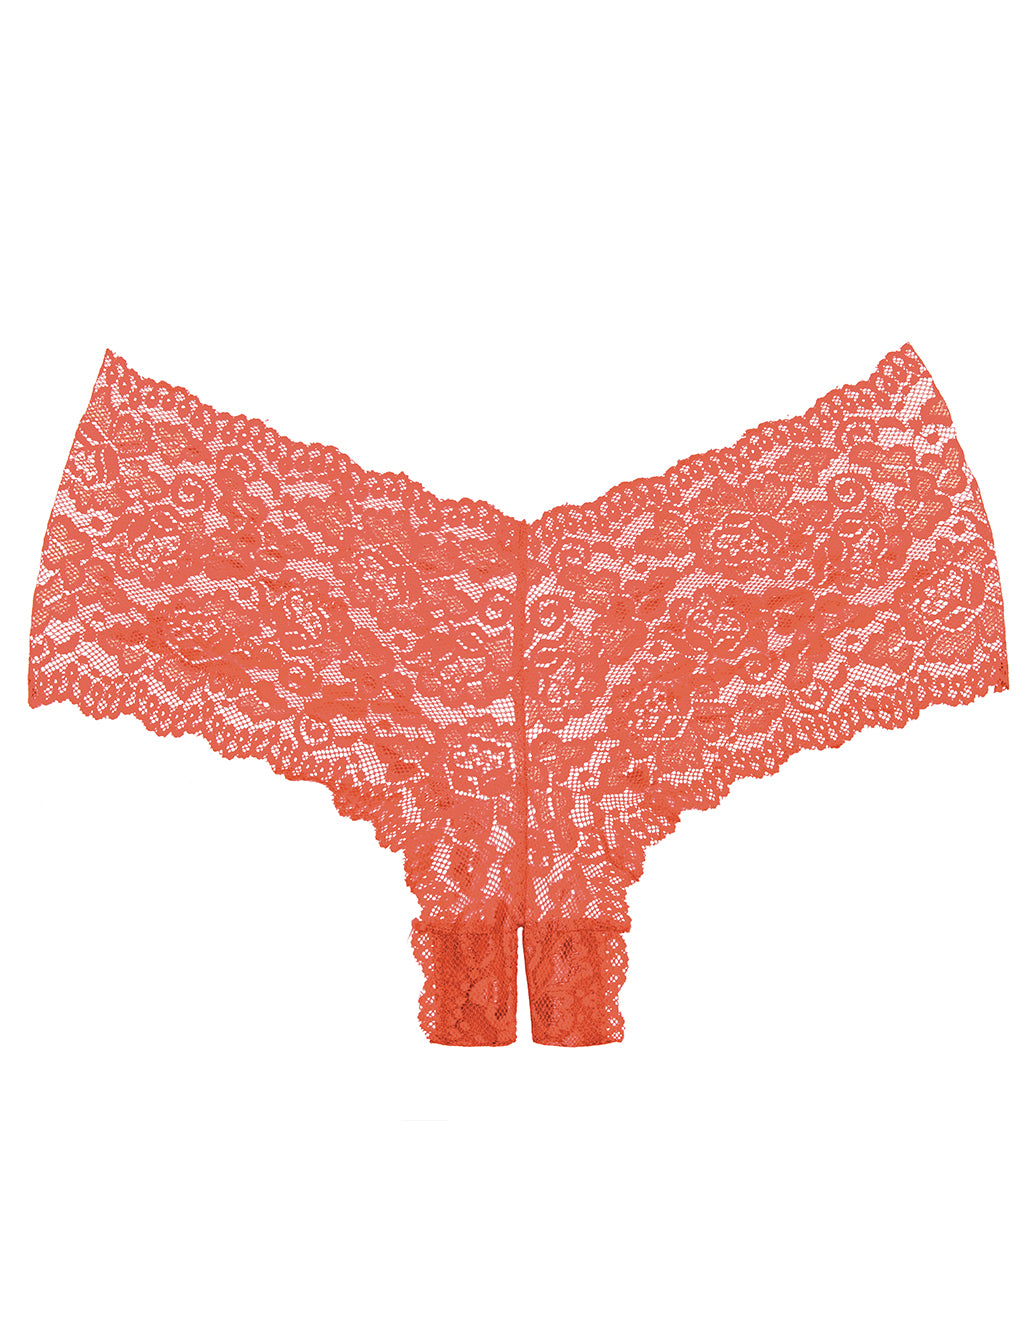 Allure Lingerie Crotchless Scallop Lace Boyshort Panty- Red- Front